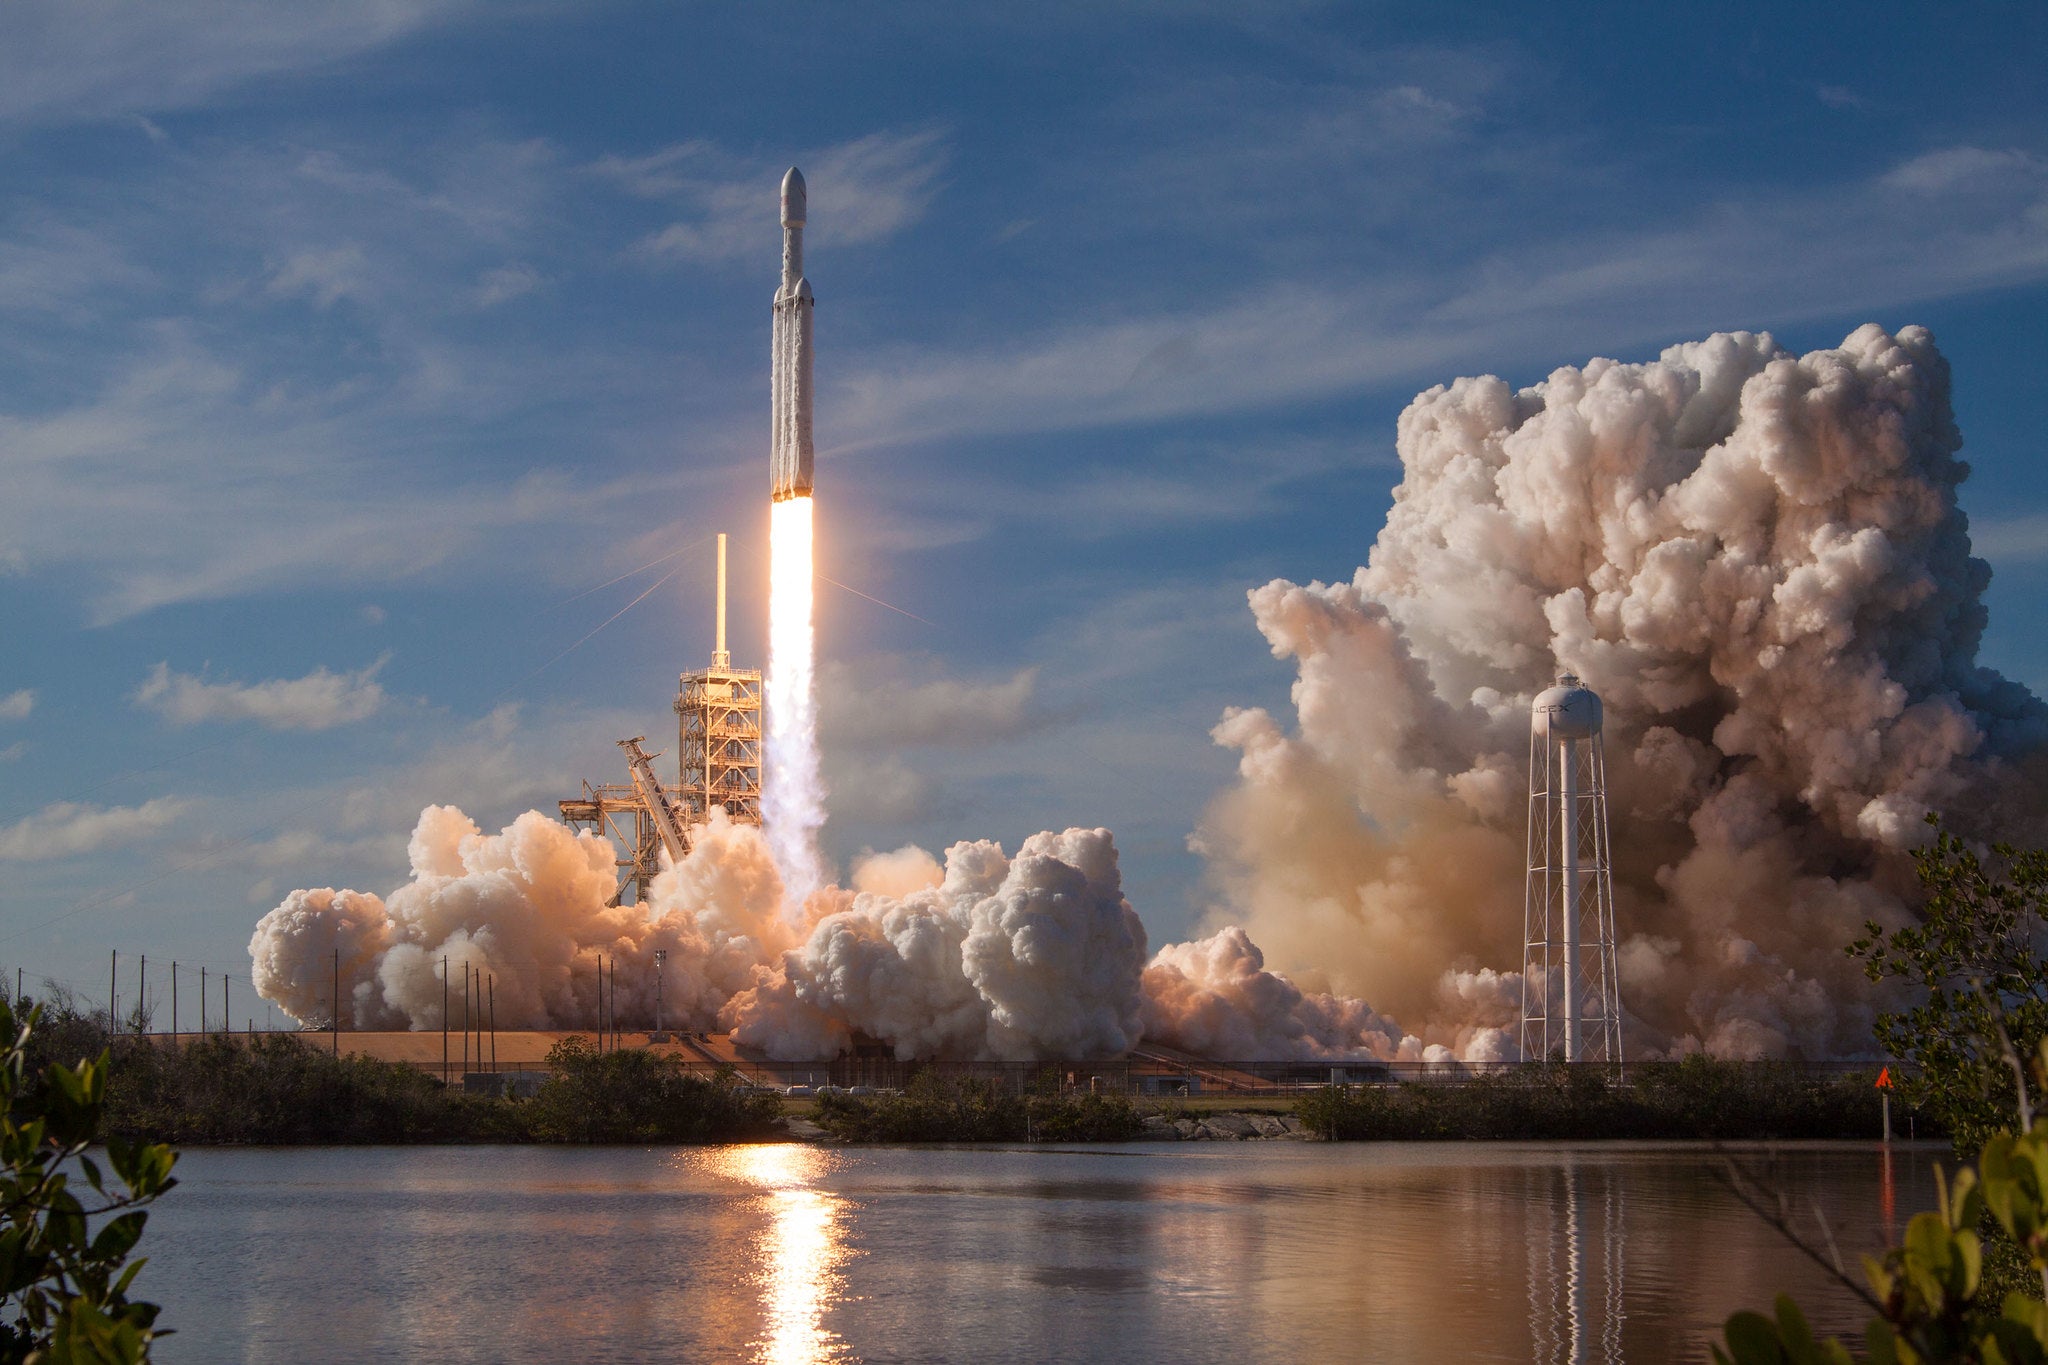 SpaceX's Powerful Falcon Heavy Rocket Will Conduct Multiple Missions In 2022 After Being Dormant For Over 2 Years